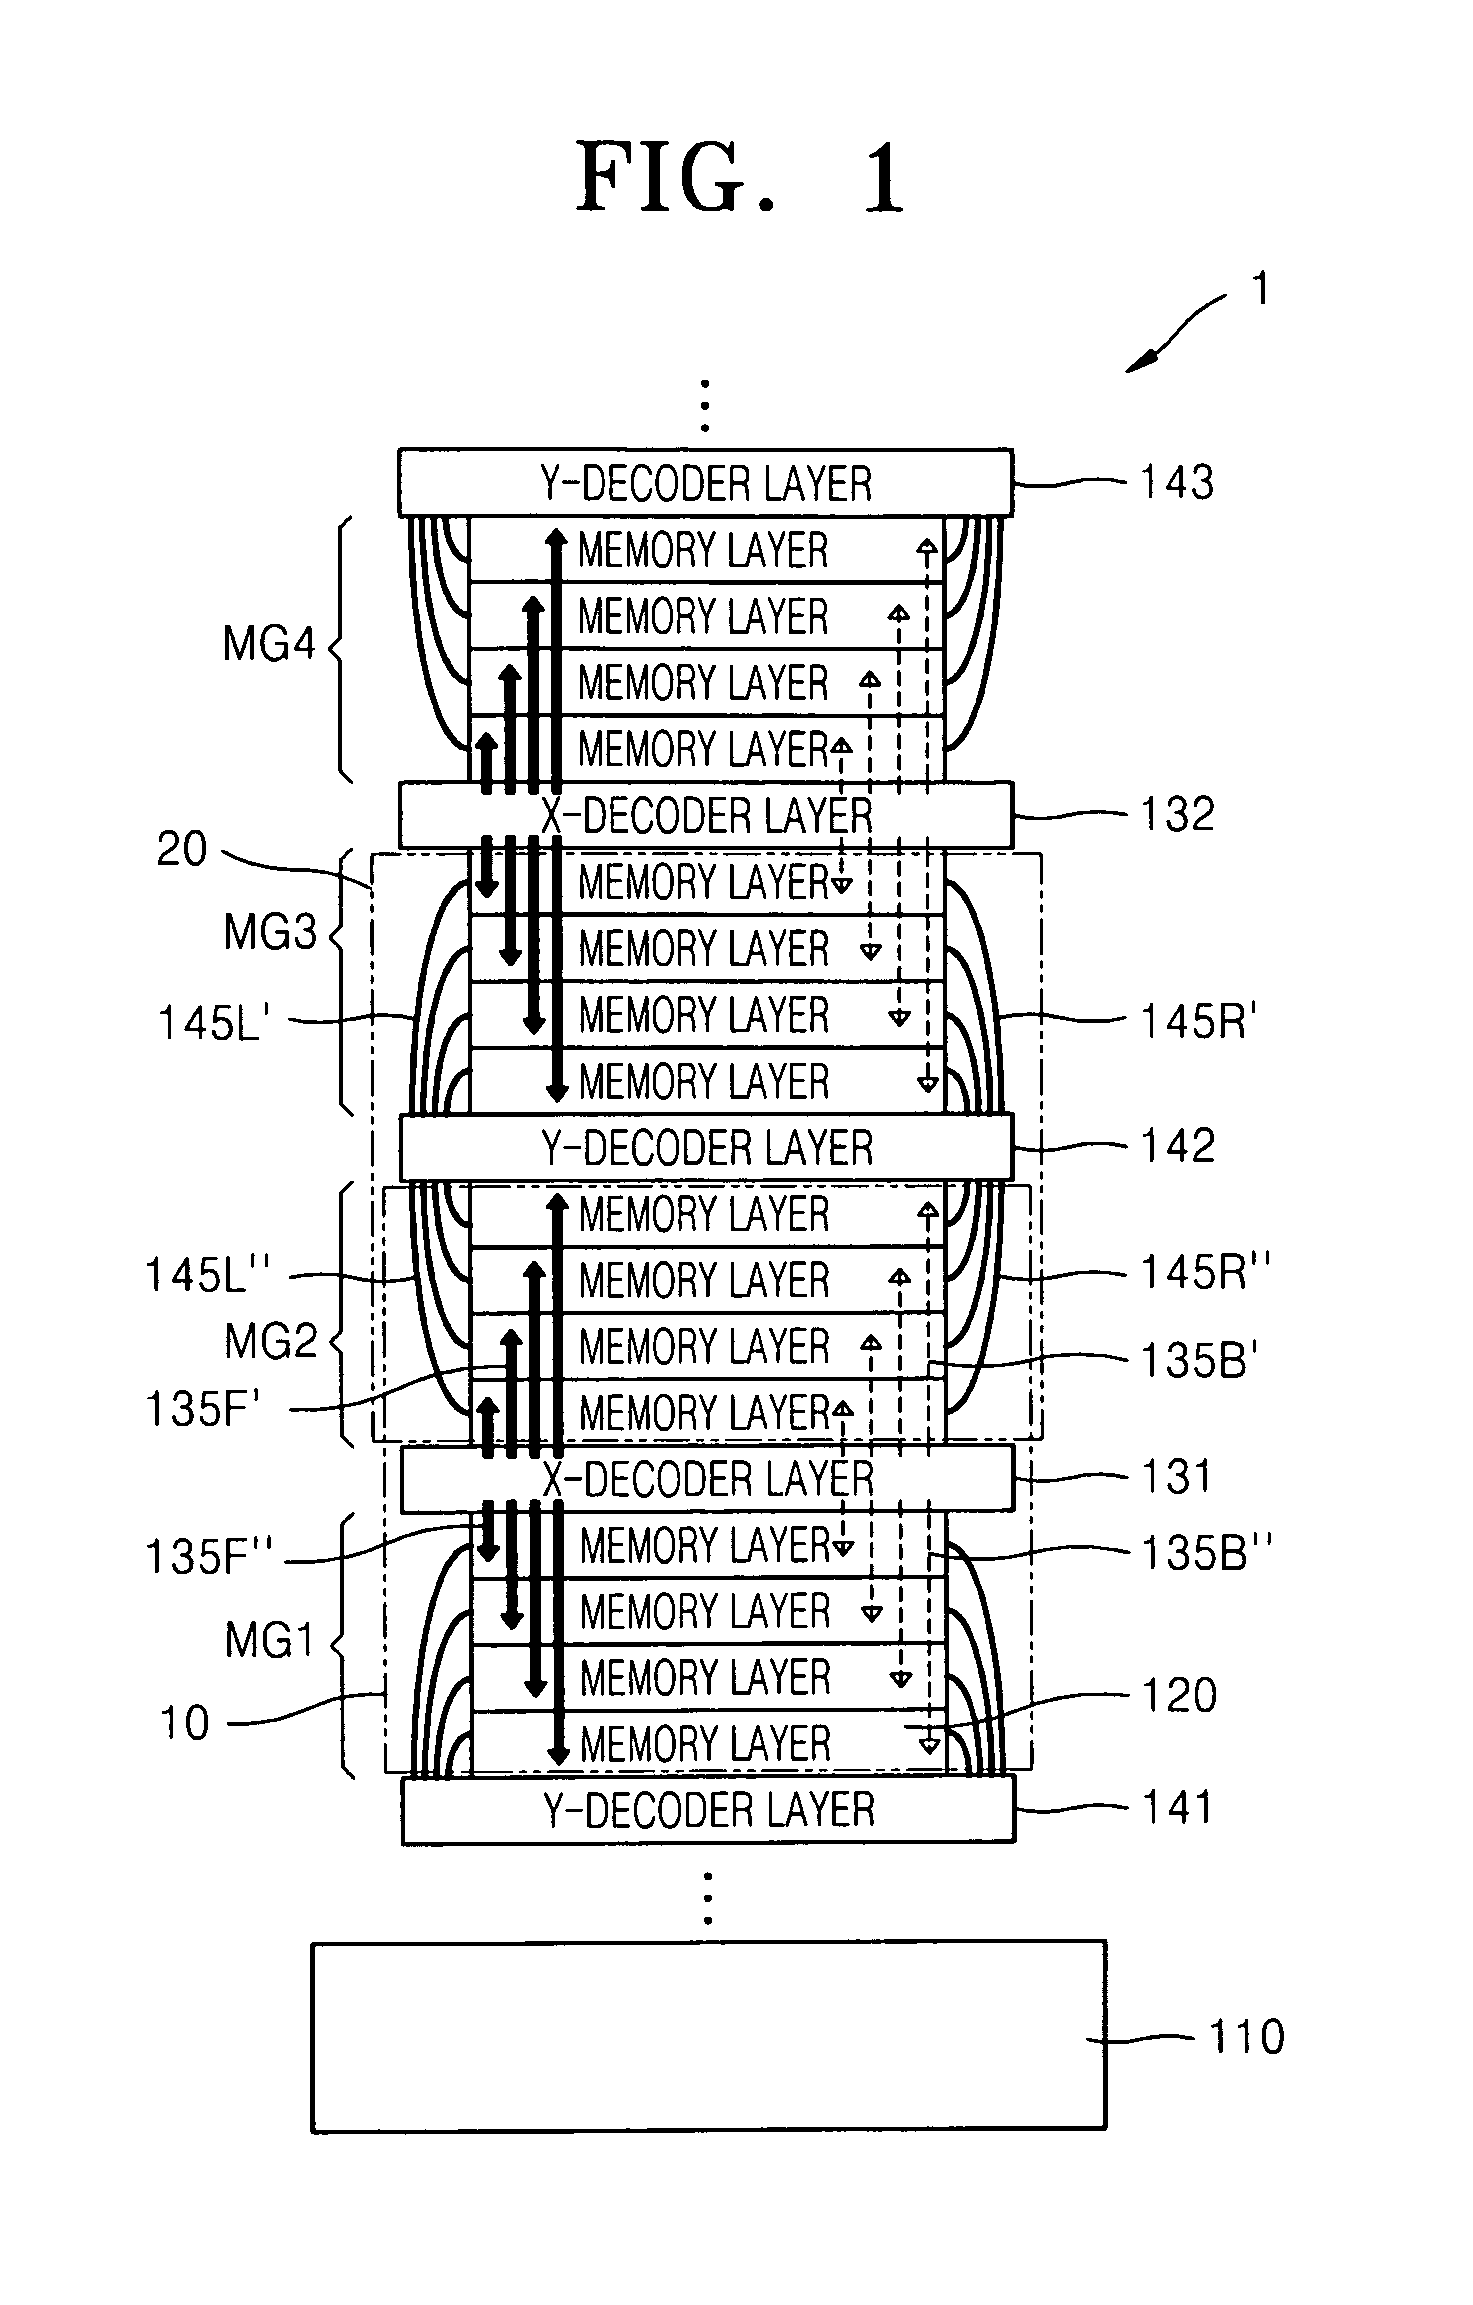 Stacked memory devices